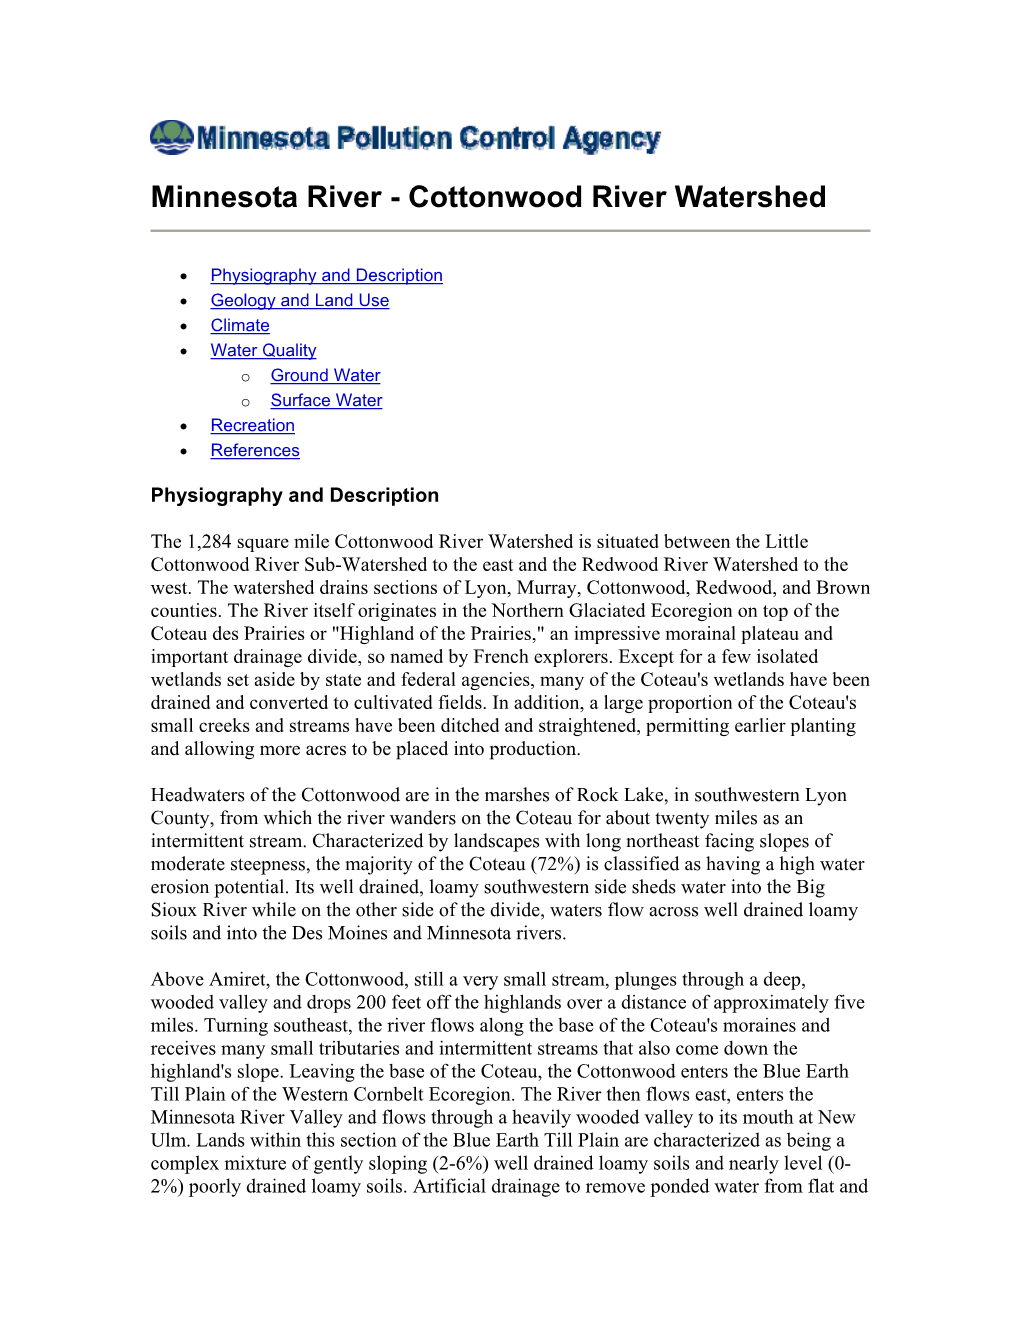 Cottonwood River Watershed